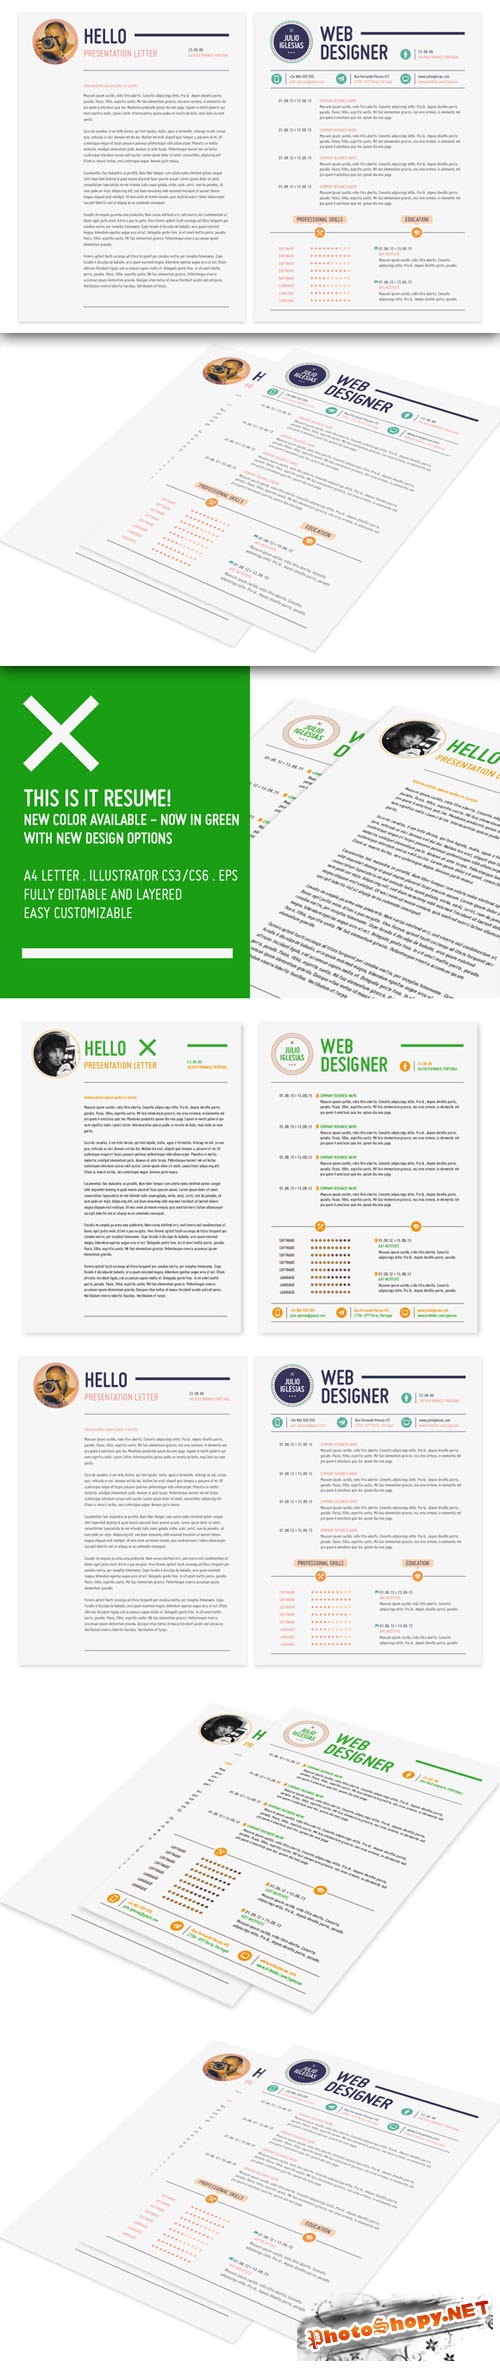 CreativeMarket - This is it Resume